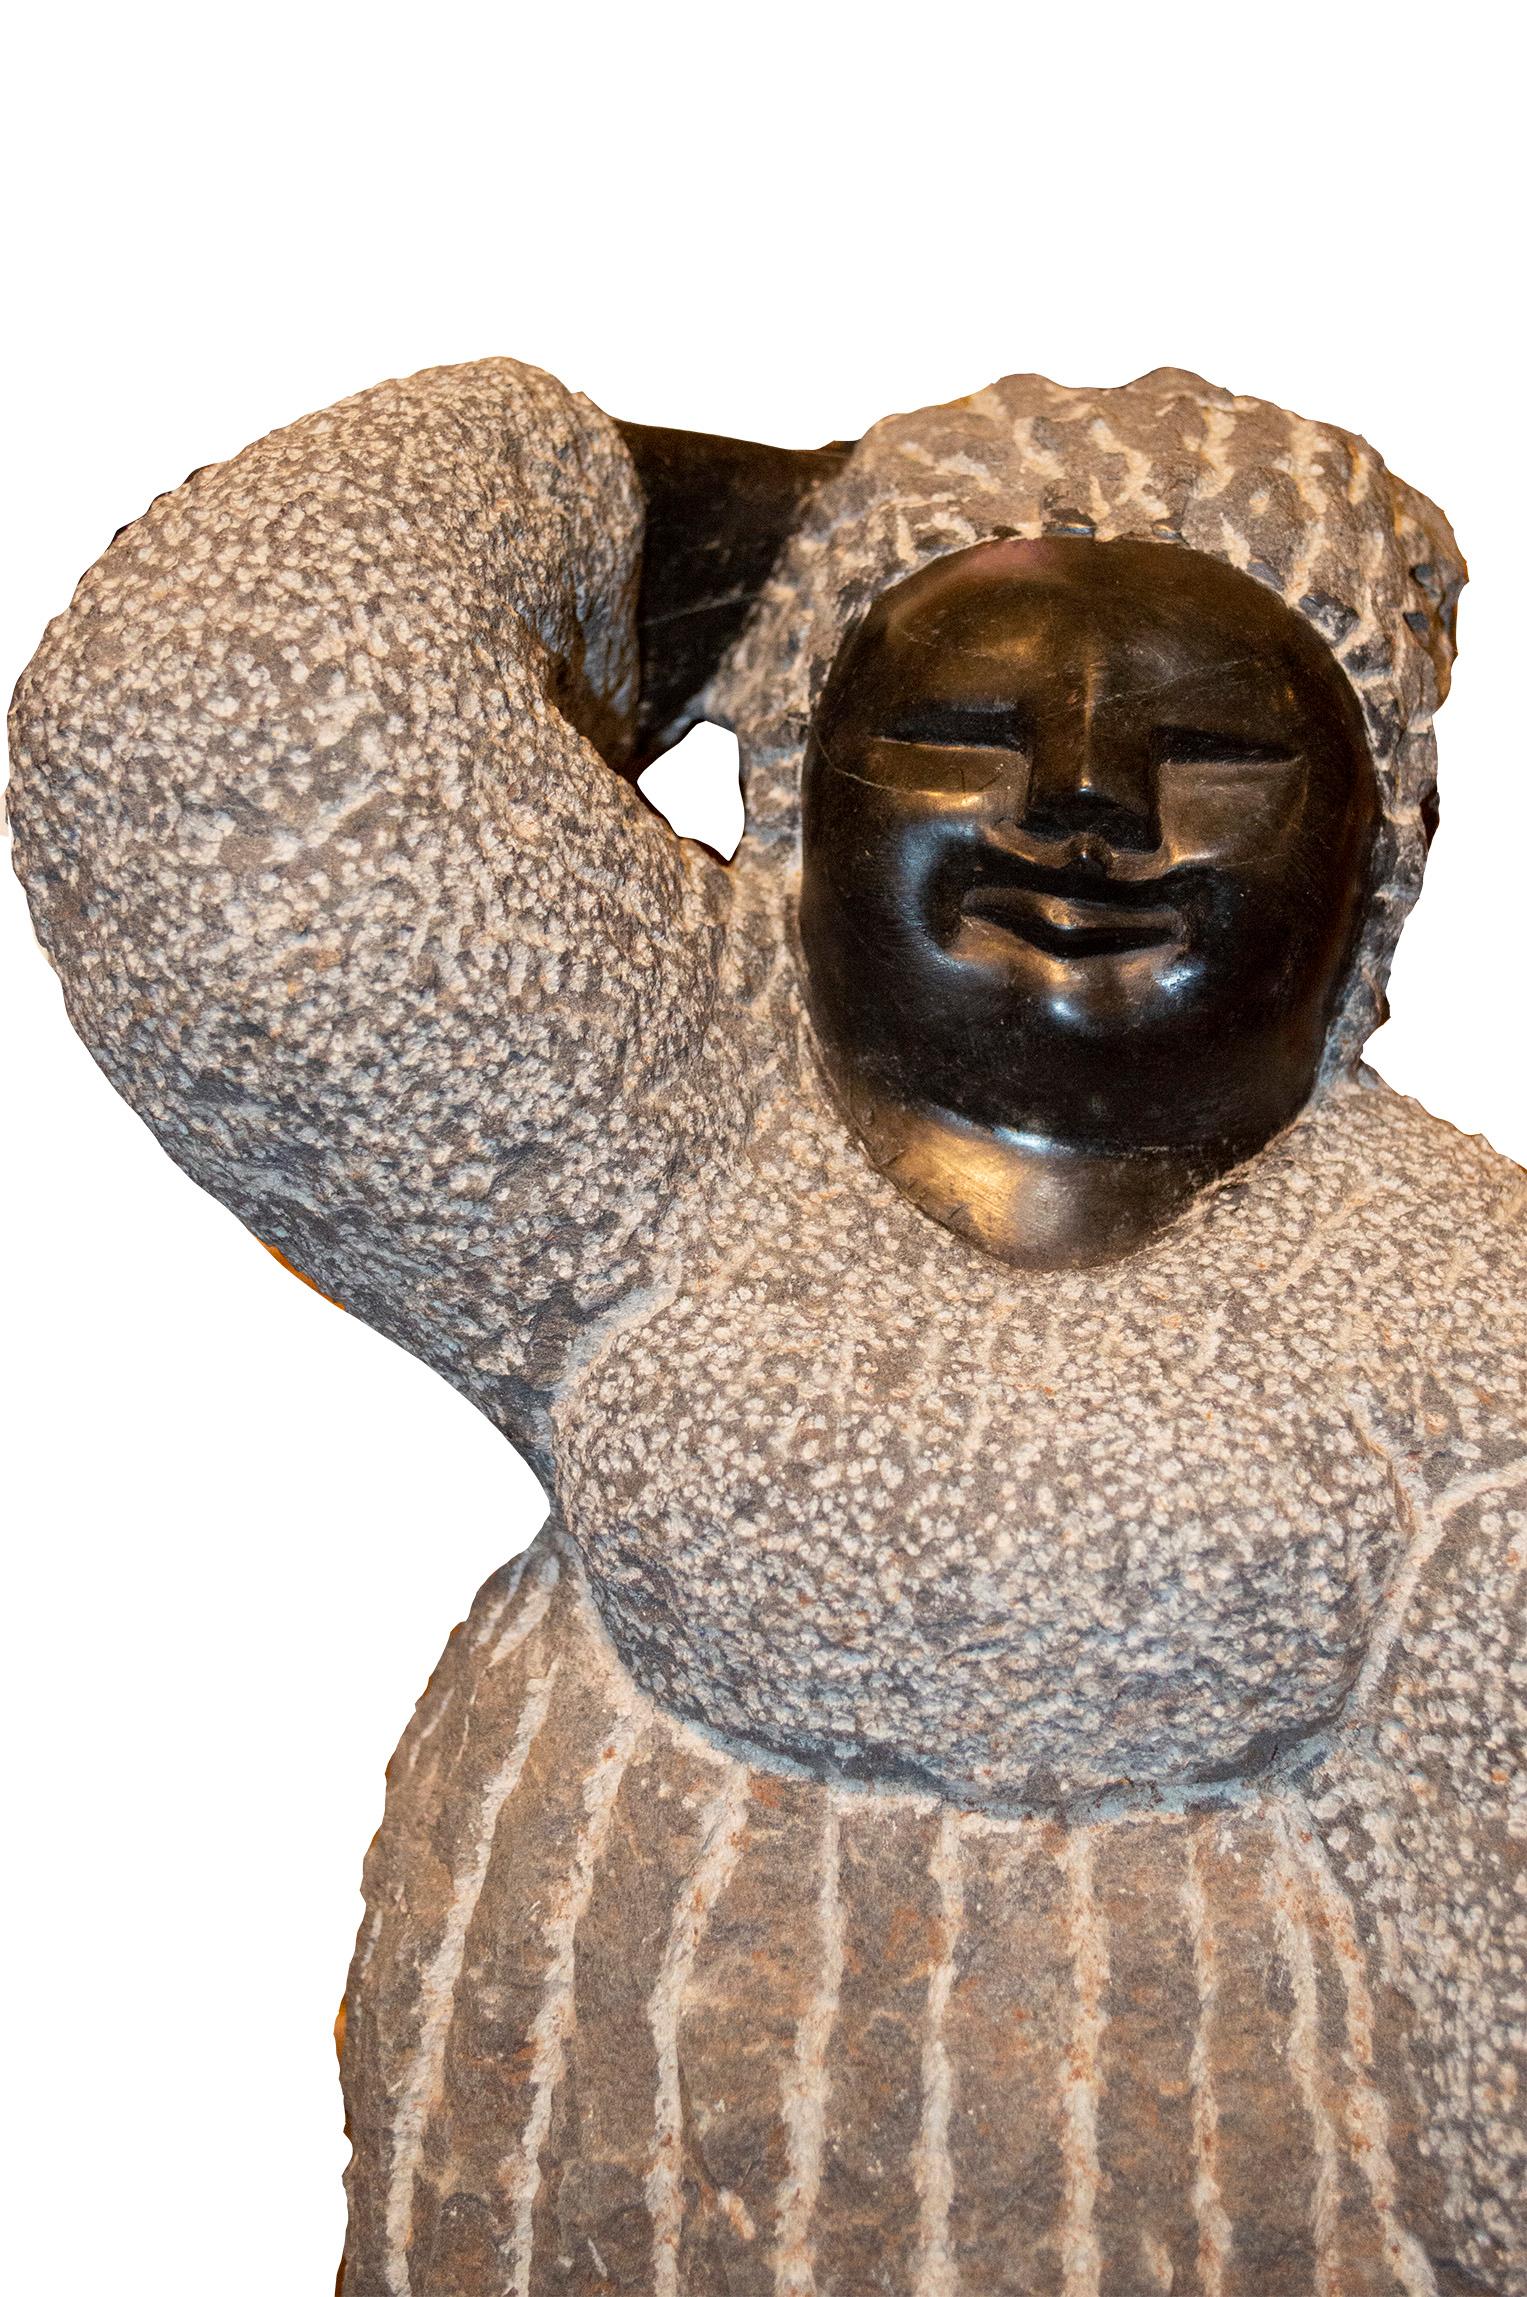 'Preoccupied' is an original black serpentine sculpture by the celebrated second generation Shona artist Colleen Madamombe. The sculpture presents a character common to Madamombe's work: a woman with a round face and wearing a billowing, layered